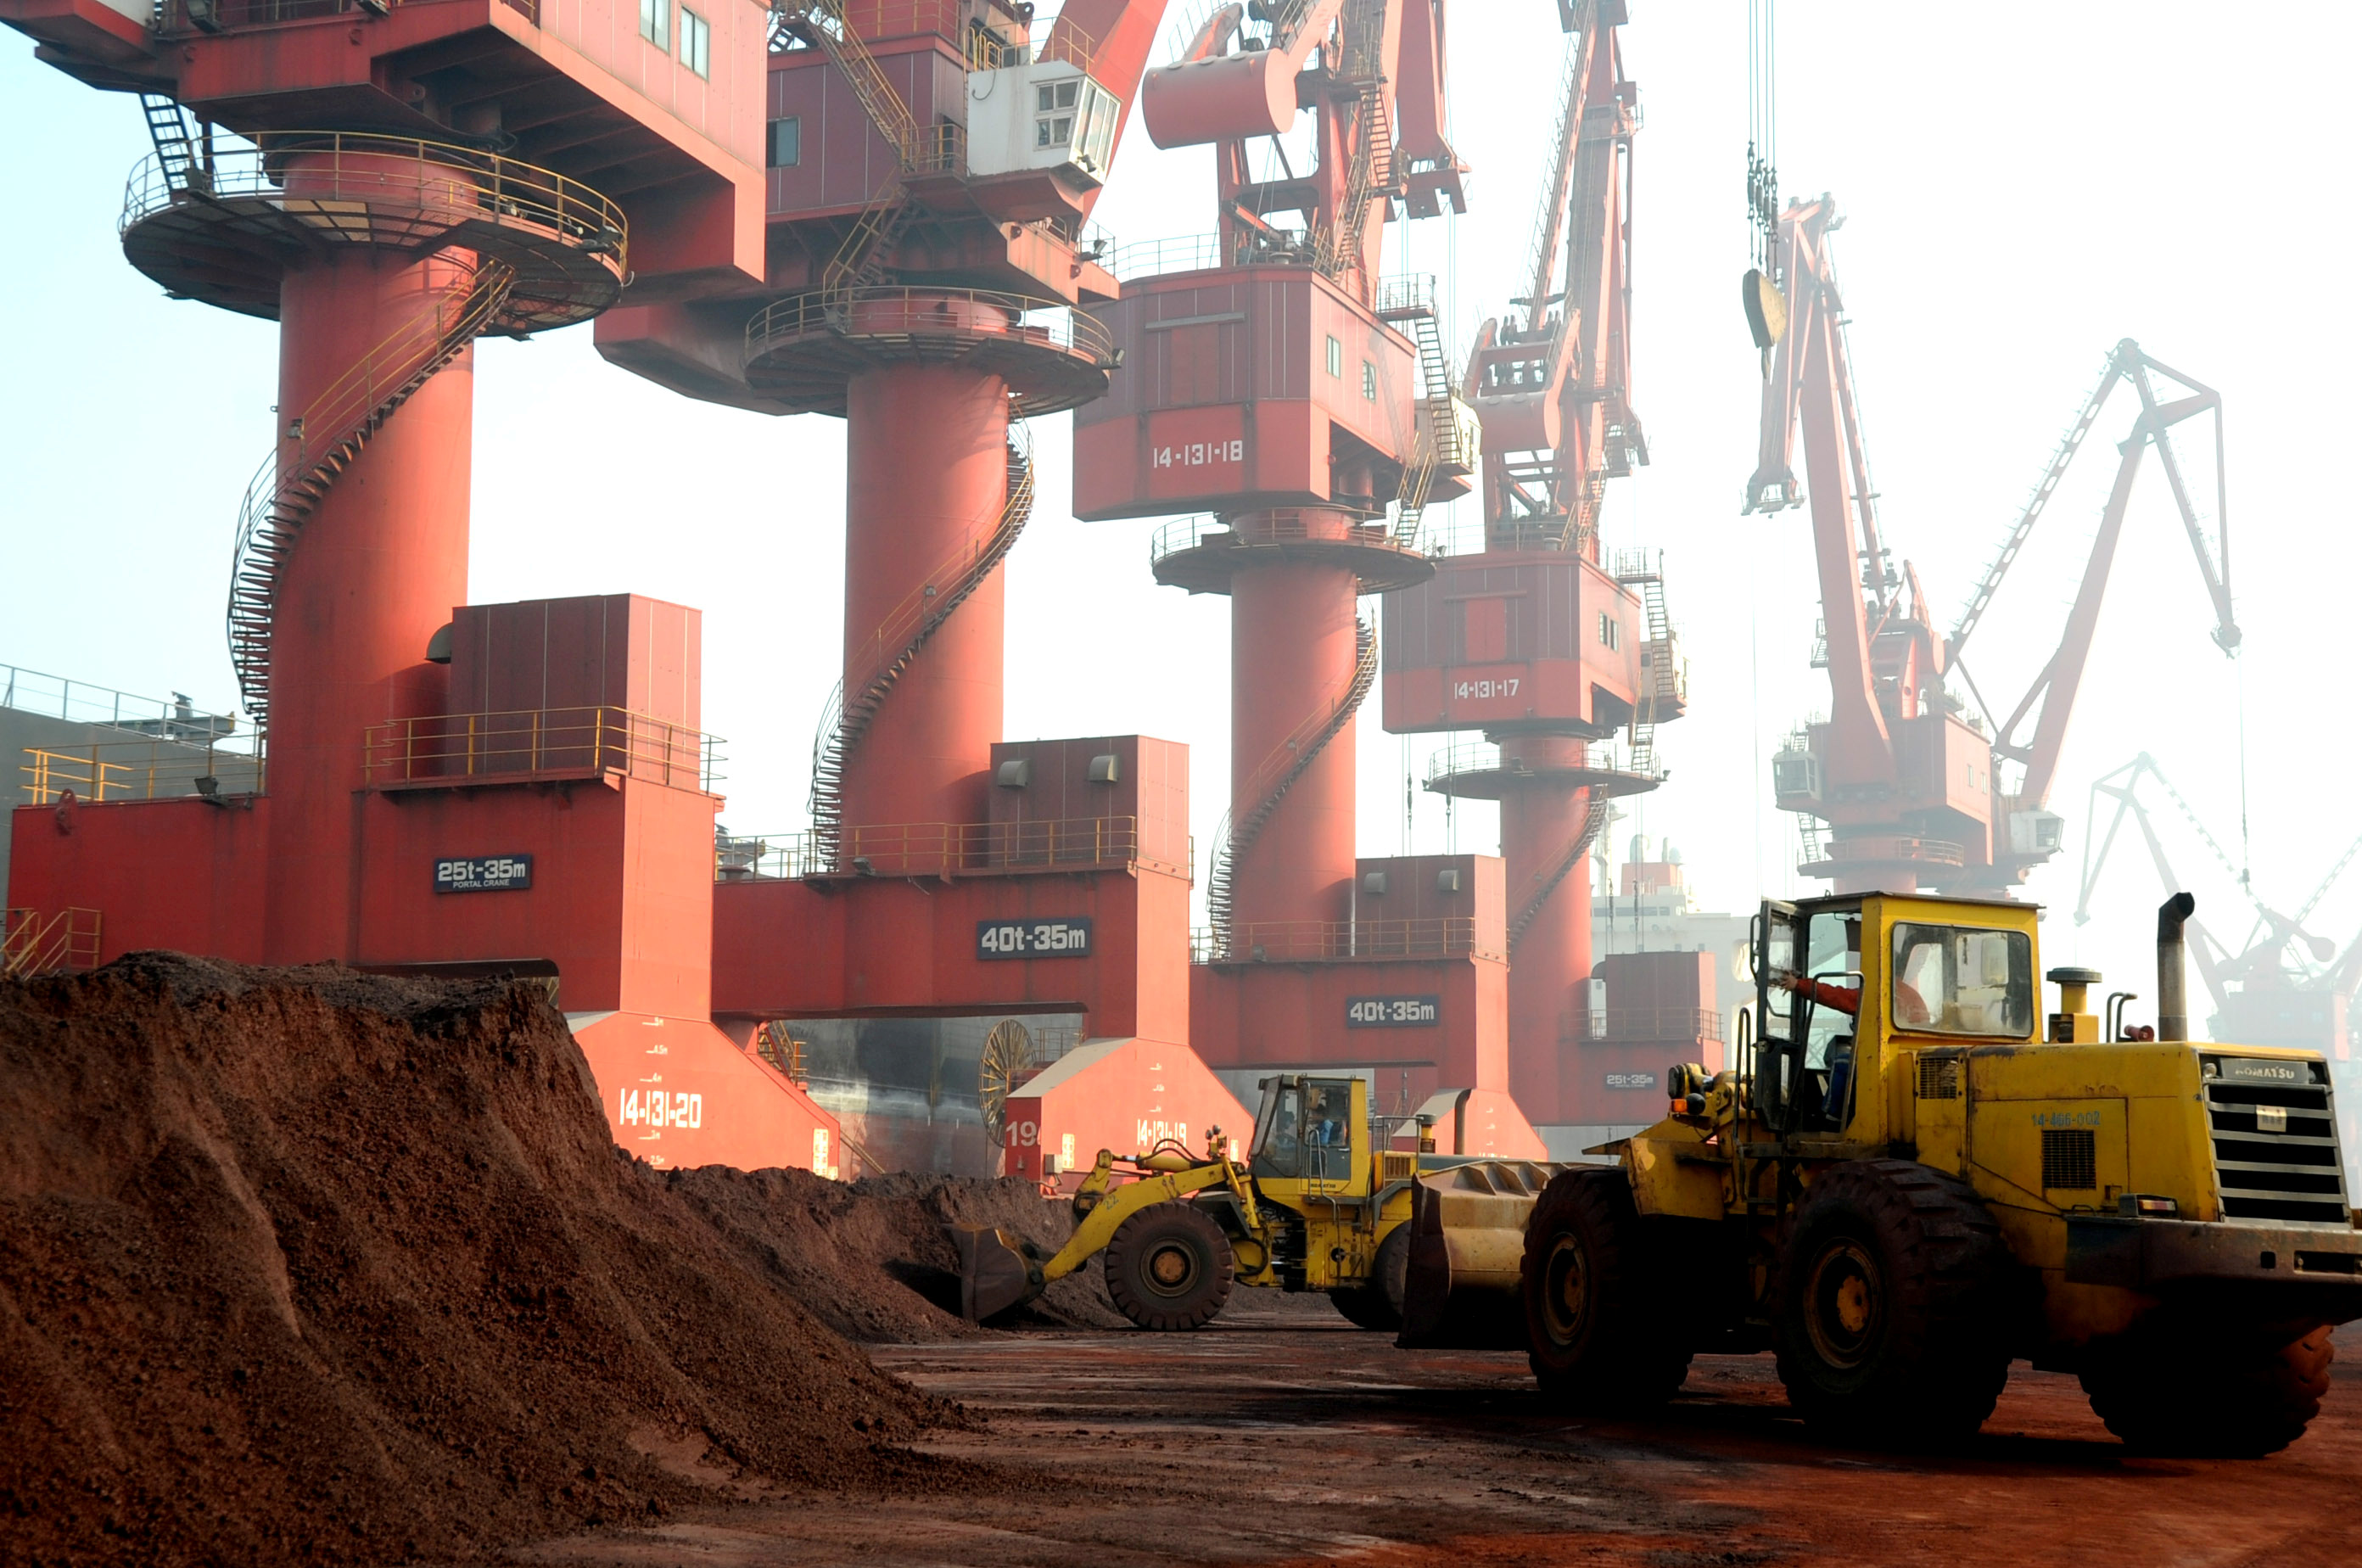 Workers transport soil containing rare earth elements for export at a port in Lianyungang, Jiangsu province, China October 31, 2010. REUTERS/Stringer/File Photo 